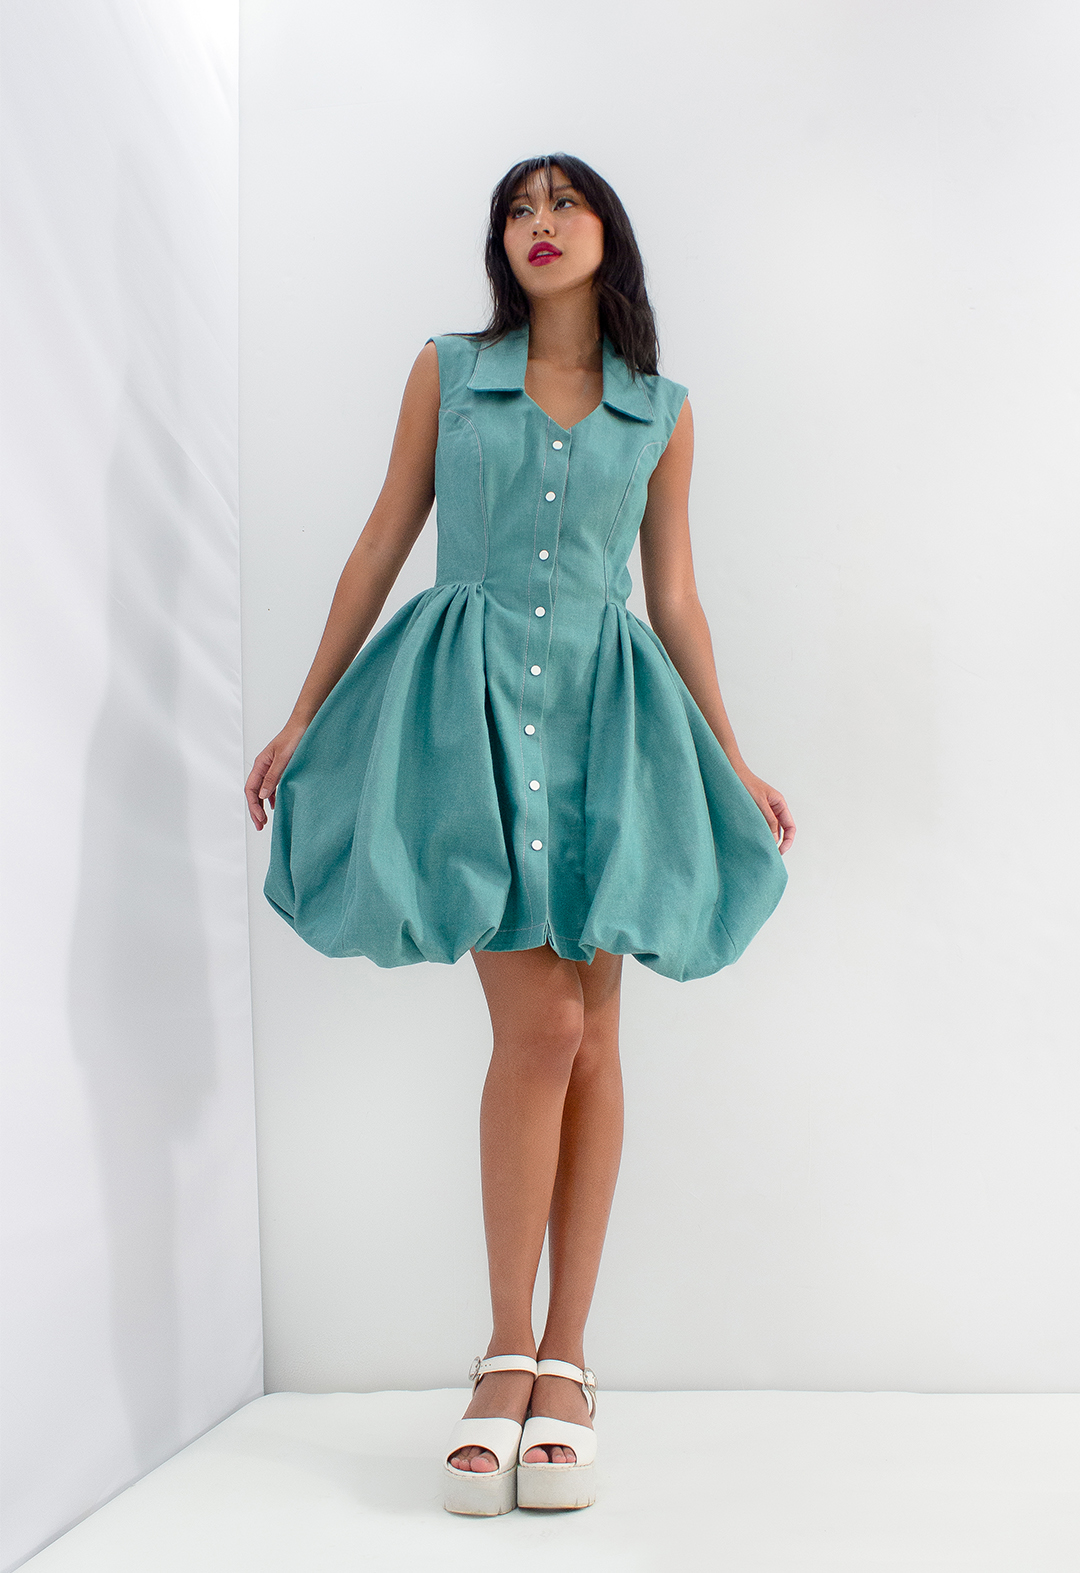 This look is inspired by the volume of petals seen on blooming flowers. During full bloom, a lot of flowers open their petals beautifully, and this look is to tell the story of a flower fairy flying through a botanical garden in the blooming moments. The entire dress is designed with teal denim to echo the pants’ look, with a fitted princess line and bubbles at the sides. The bubbles are the imaginary petals that create the shape of a flower. The idea of the dress is to give a whimsical scene of being in any flower garden that the audience can imagine.